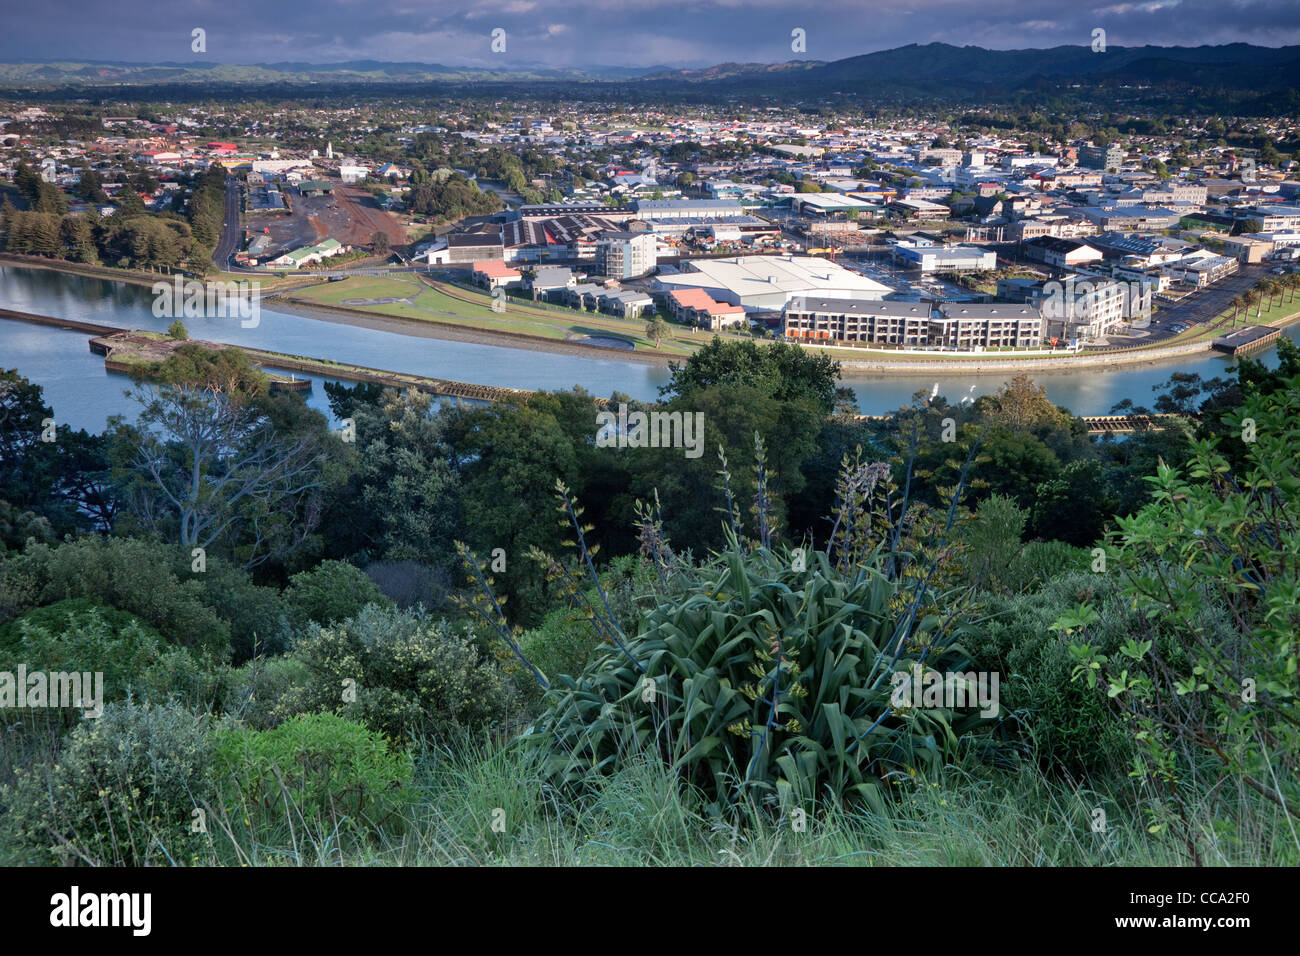 Gisborne, New Zealand. First town in the world to greet each day's new sunrise. Stock Photo